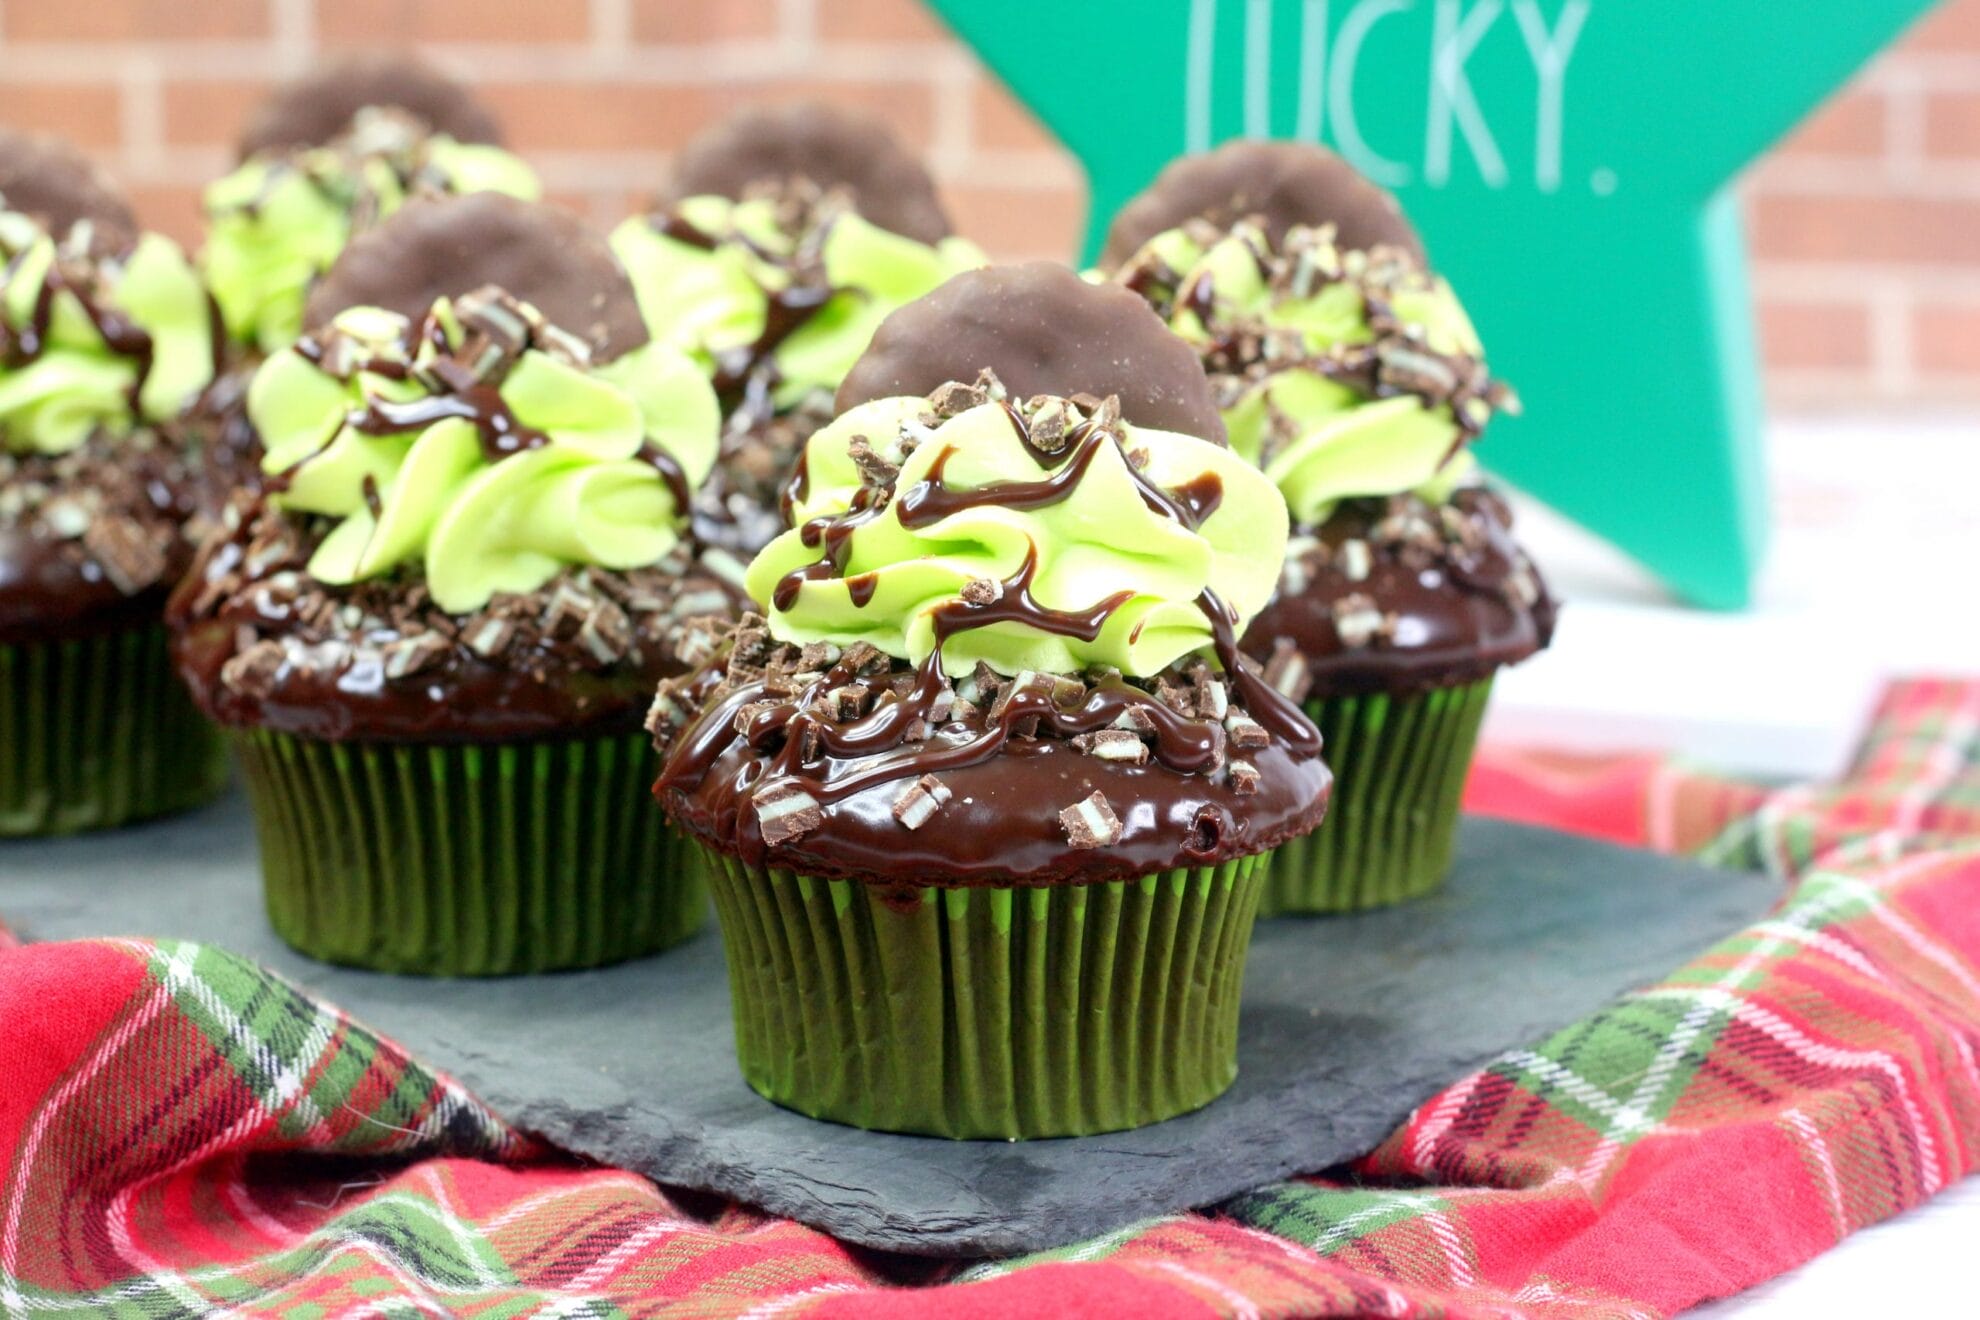 Mint goes hand and hand with St. Patrick's Day. If you are looking for an amazing St. Patrick's Day cupcake, you have to make these Andes Mint Cupcakes.